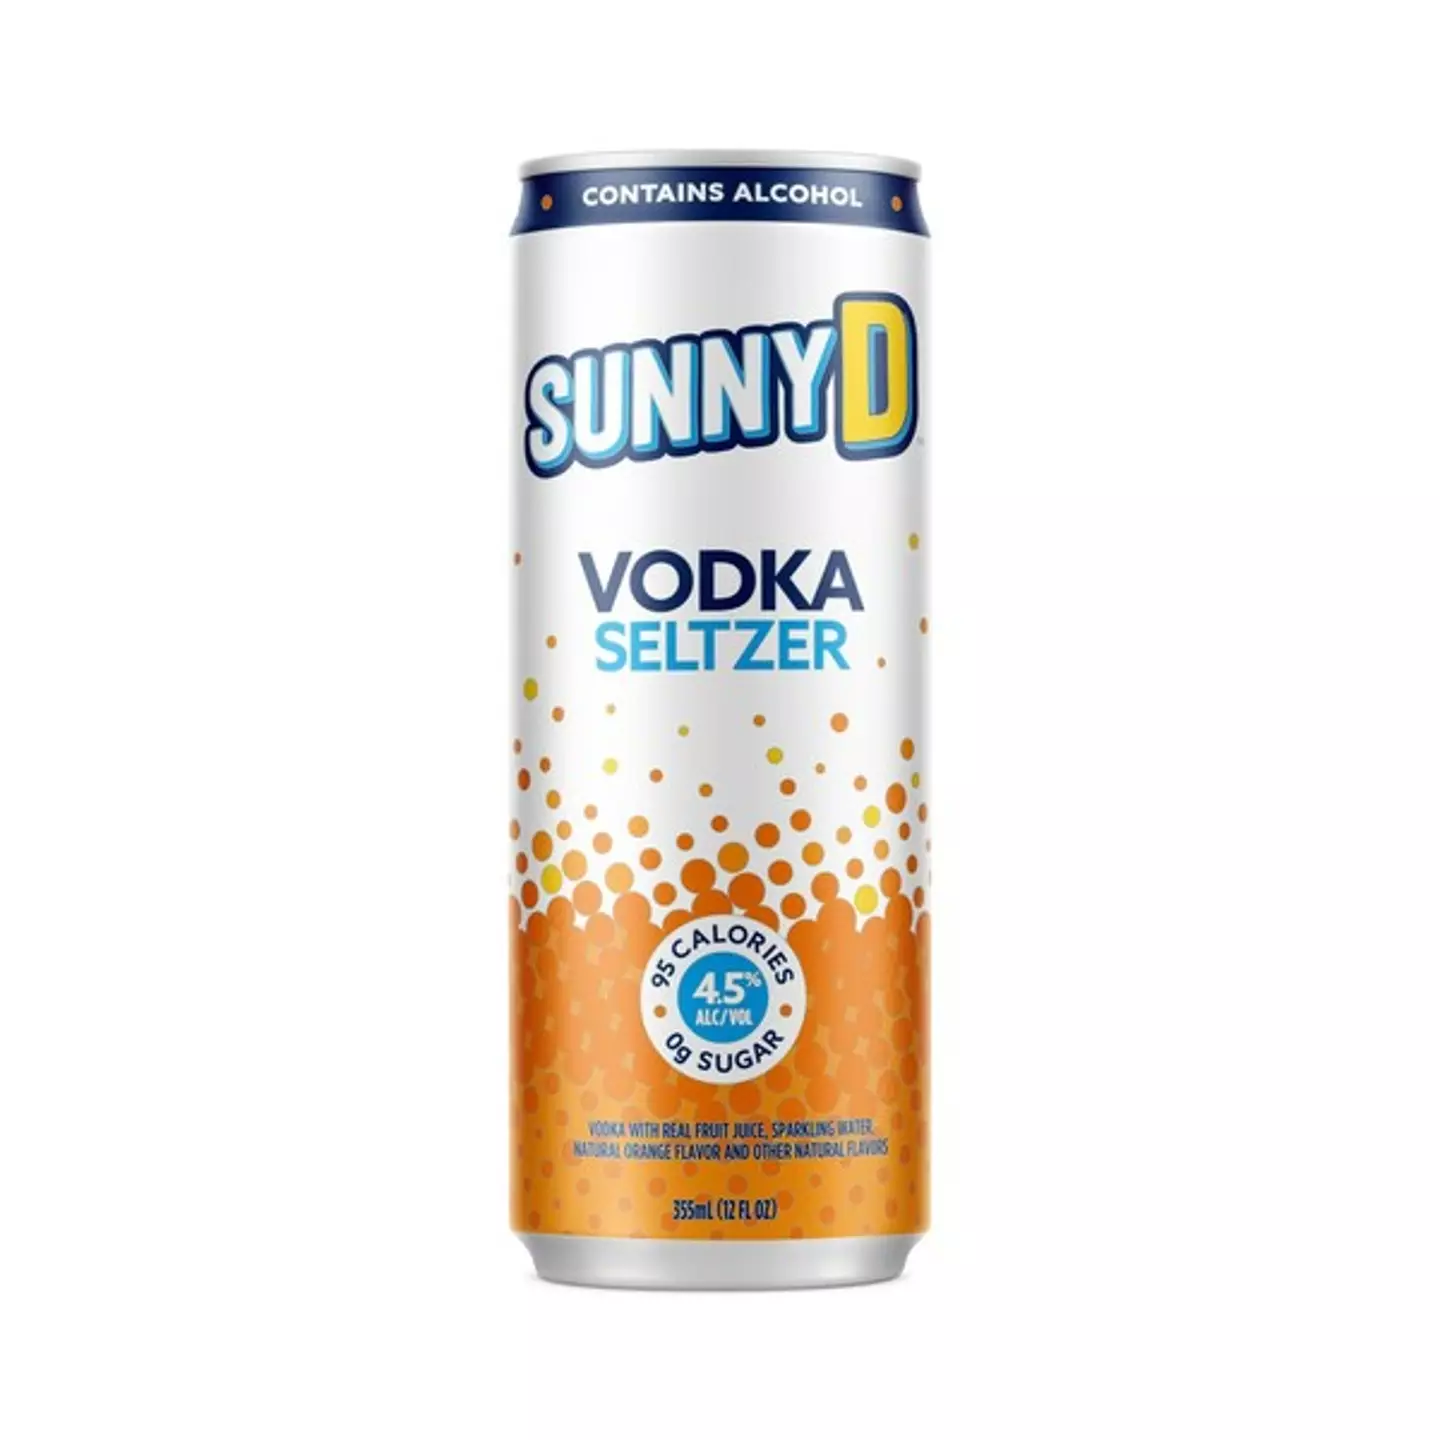 SunnyD have launched hard seltzer in the US.